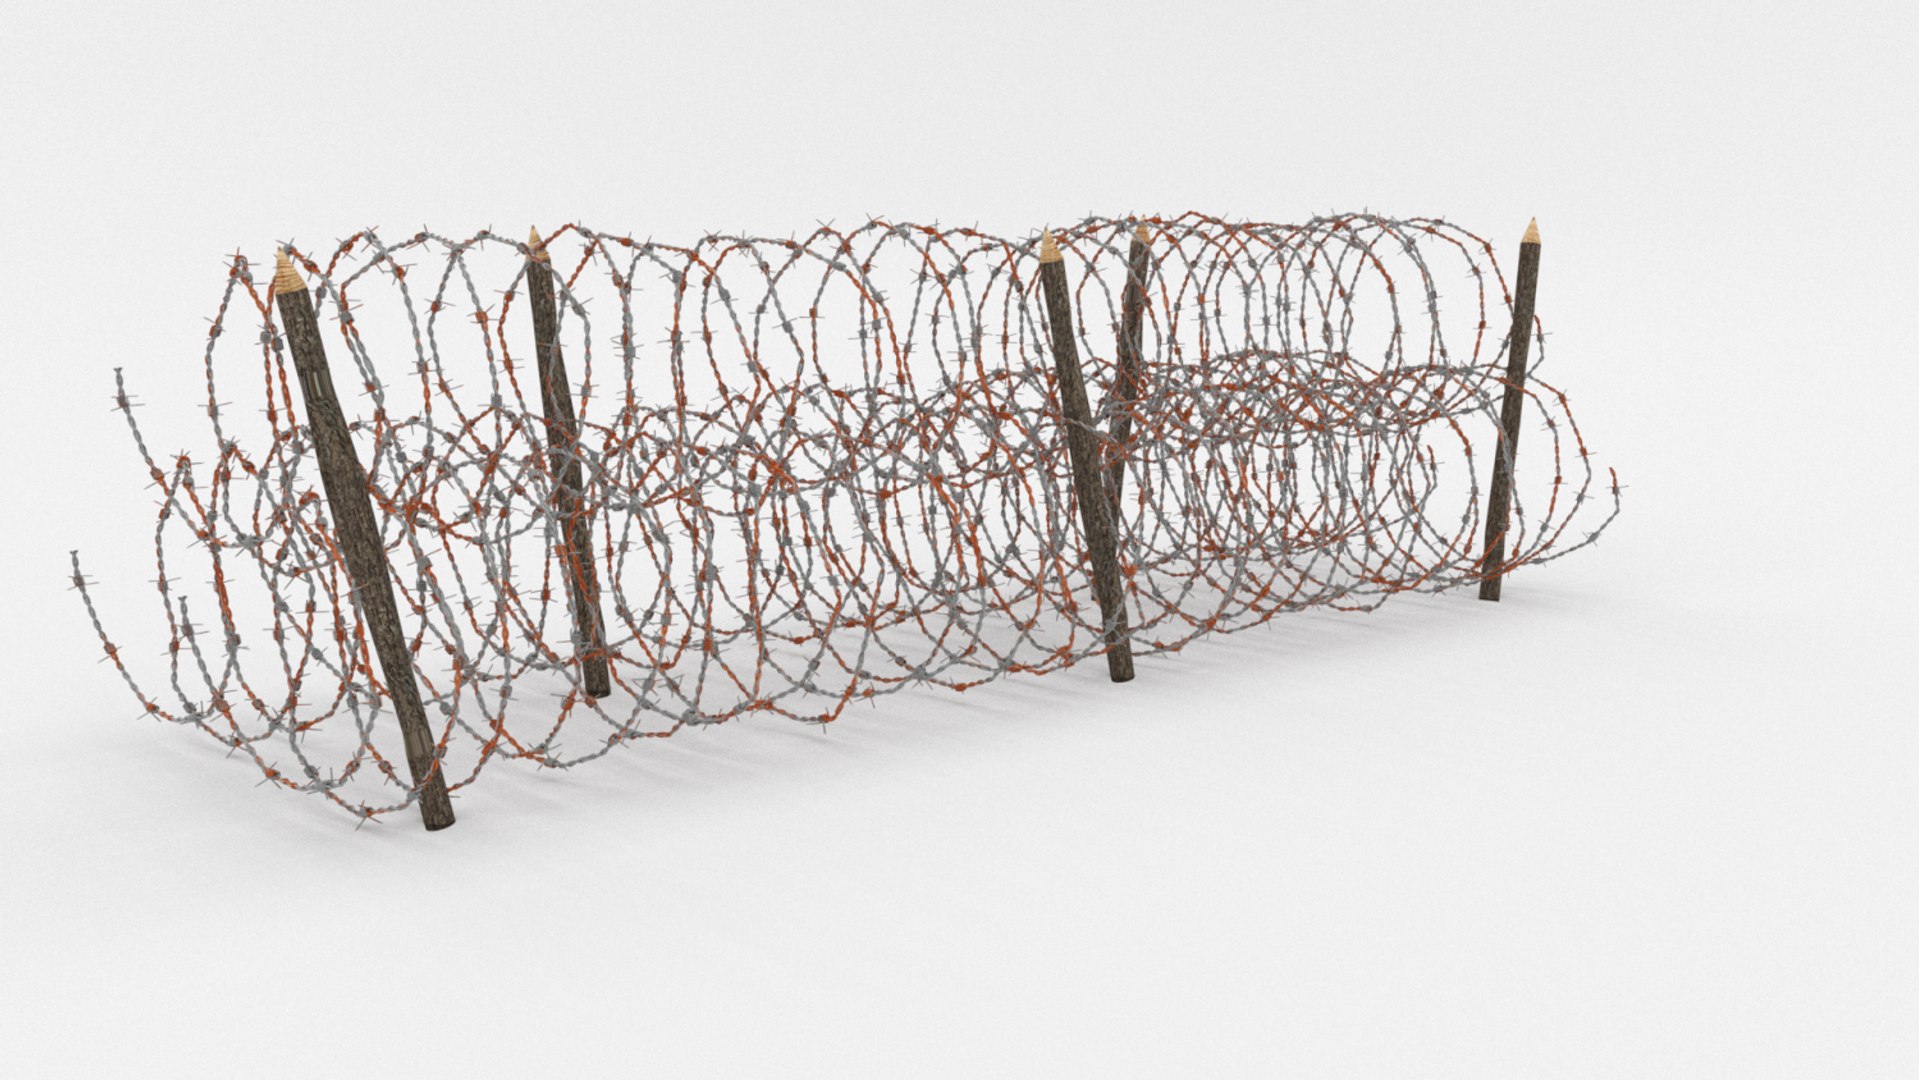 Barbed Wire Obstacle 3D Model - TurboSquid 1191620